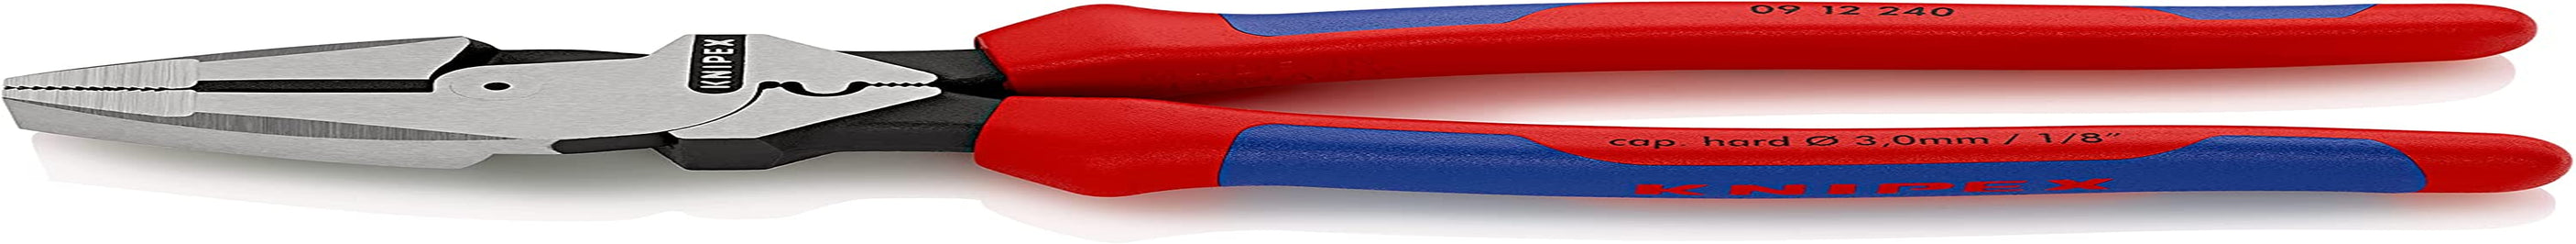 KNIPEX Tools, Knipex 09 12 240 9.5-Inch Ultra-High Leverage Lineman'S Pliers with Fish Tape Puller and Crimper